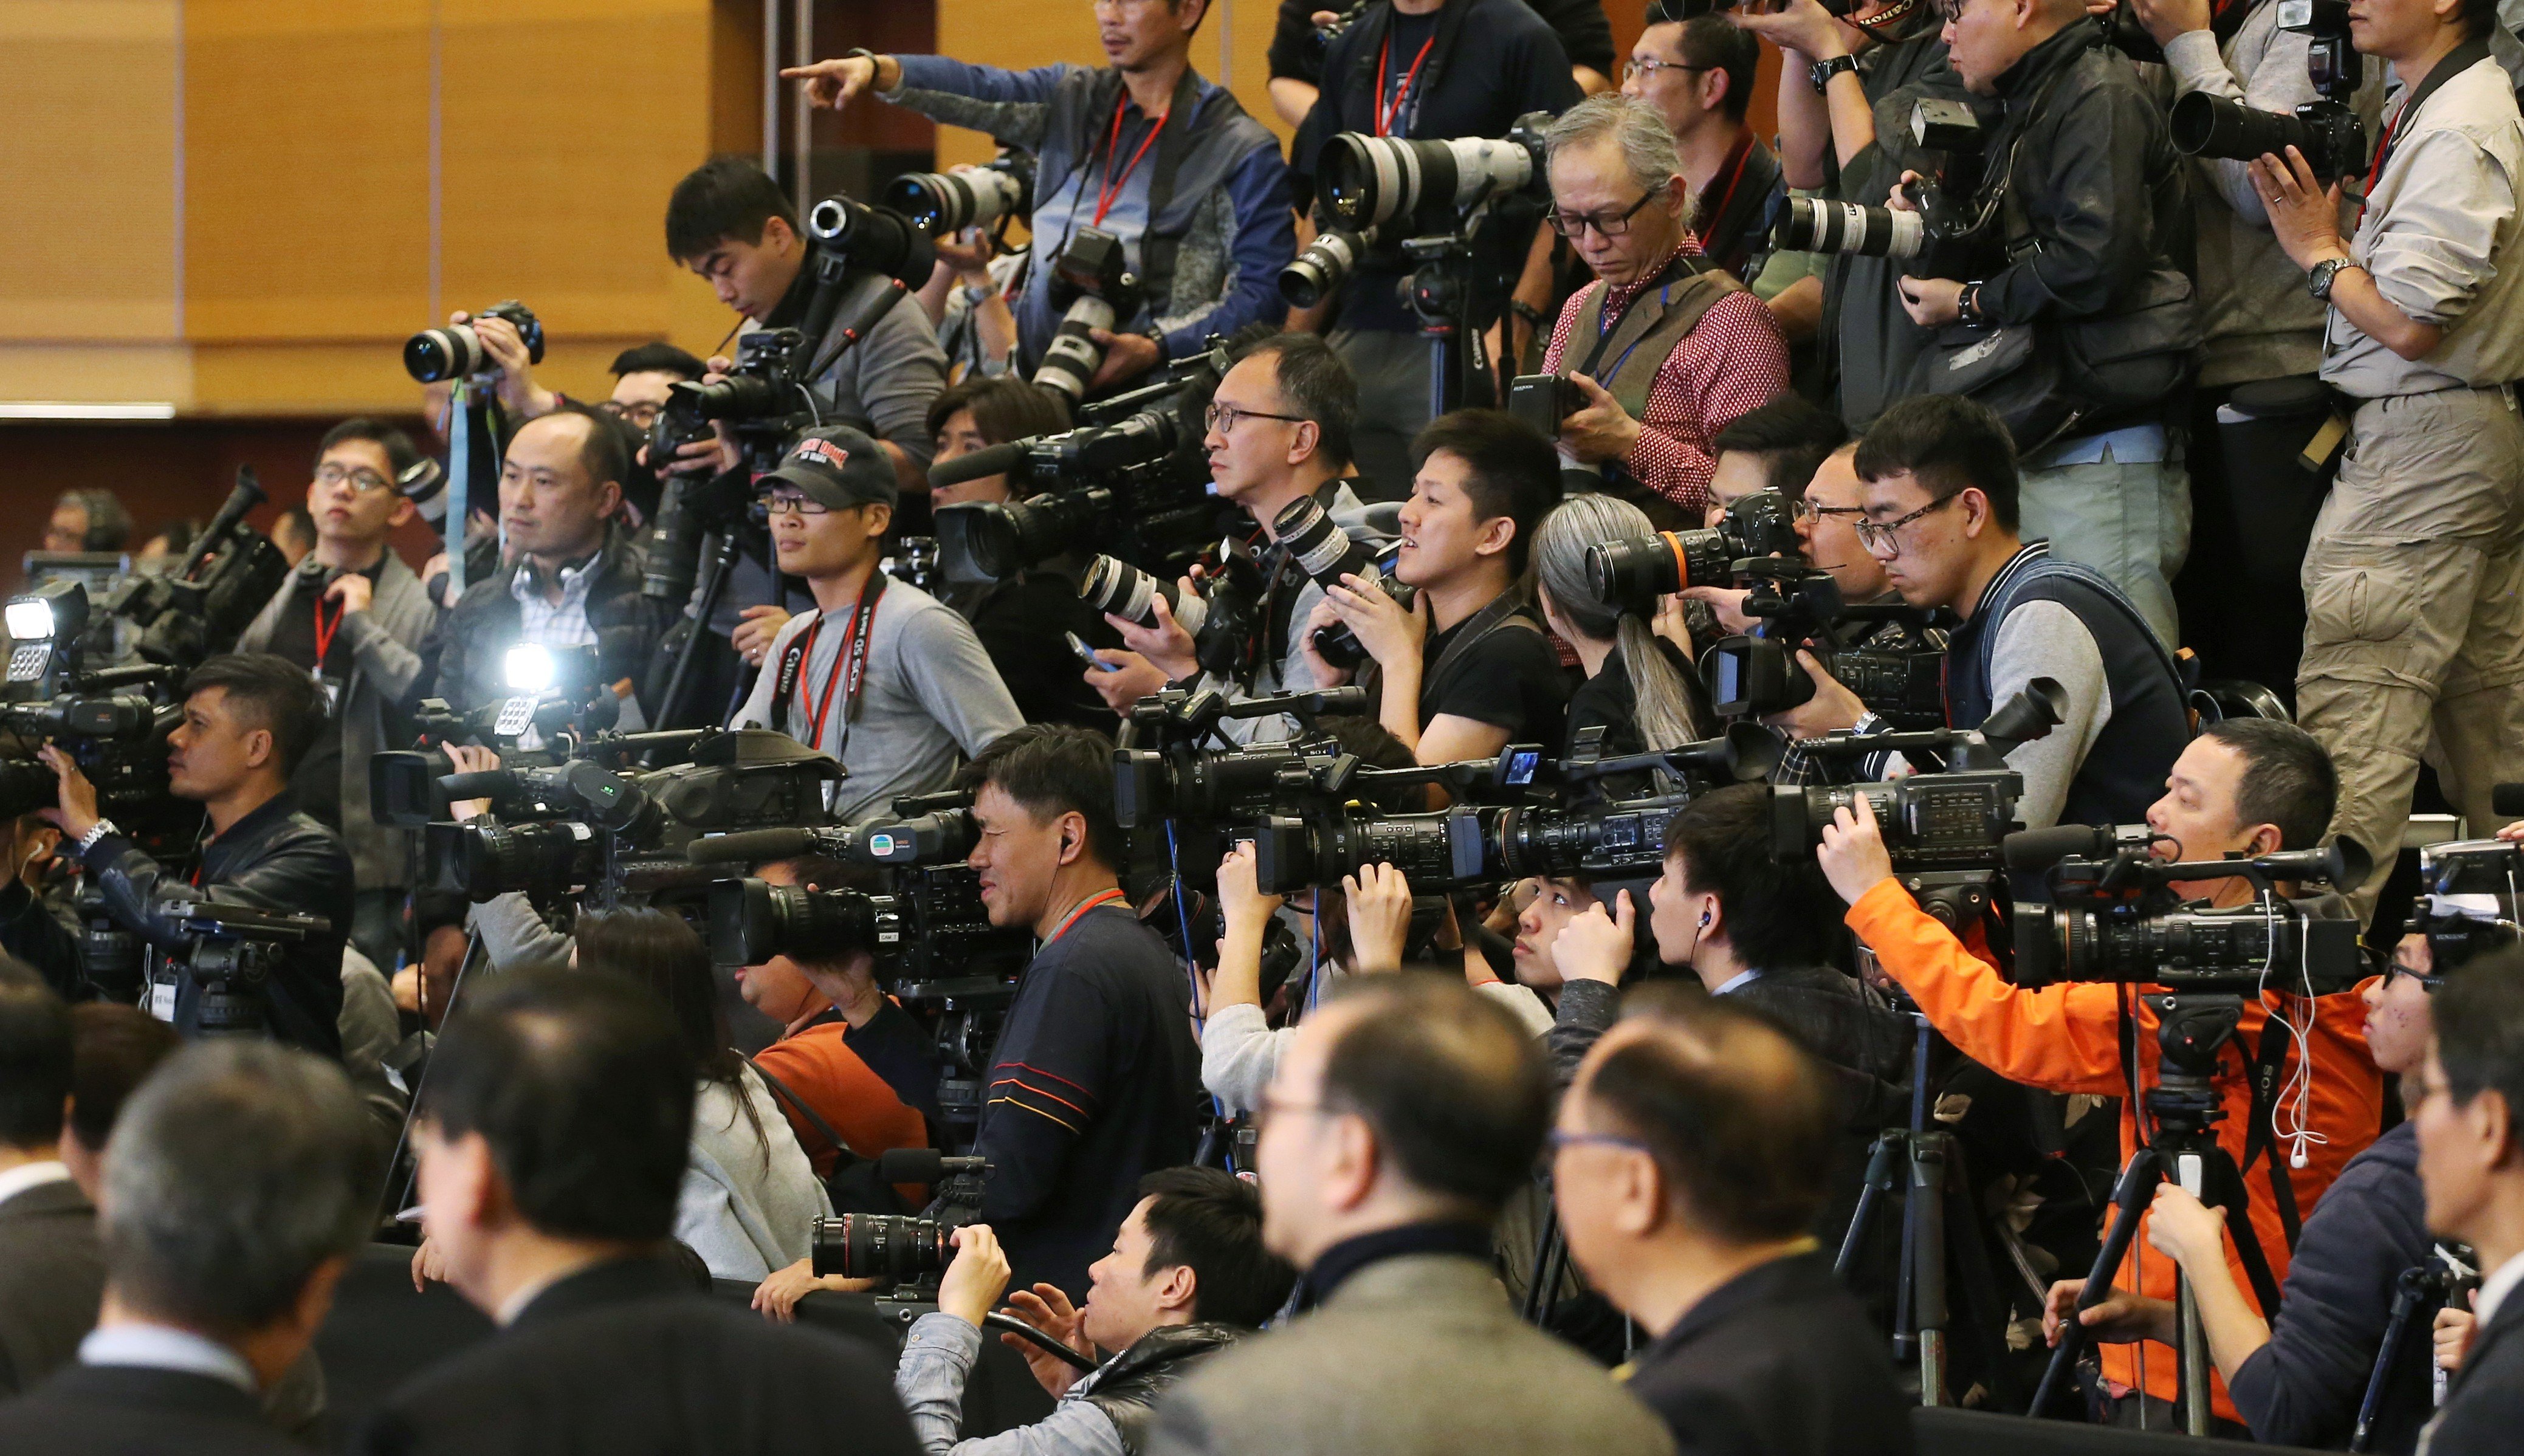 Journalists attend a media session with Hong Kong leader Carrie Lam in 2017. Photo: Felix Wong